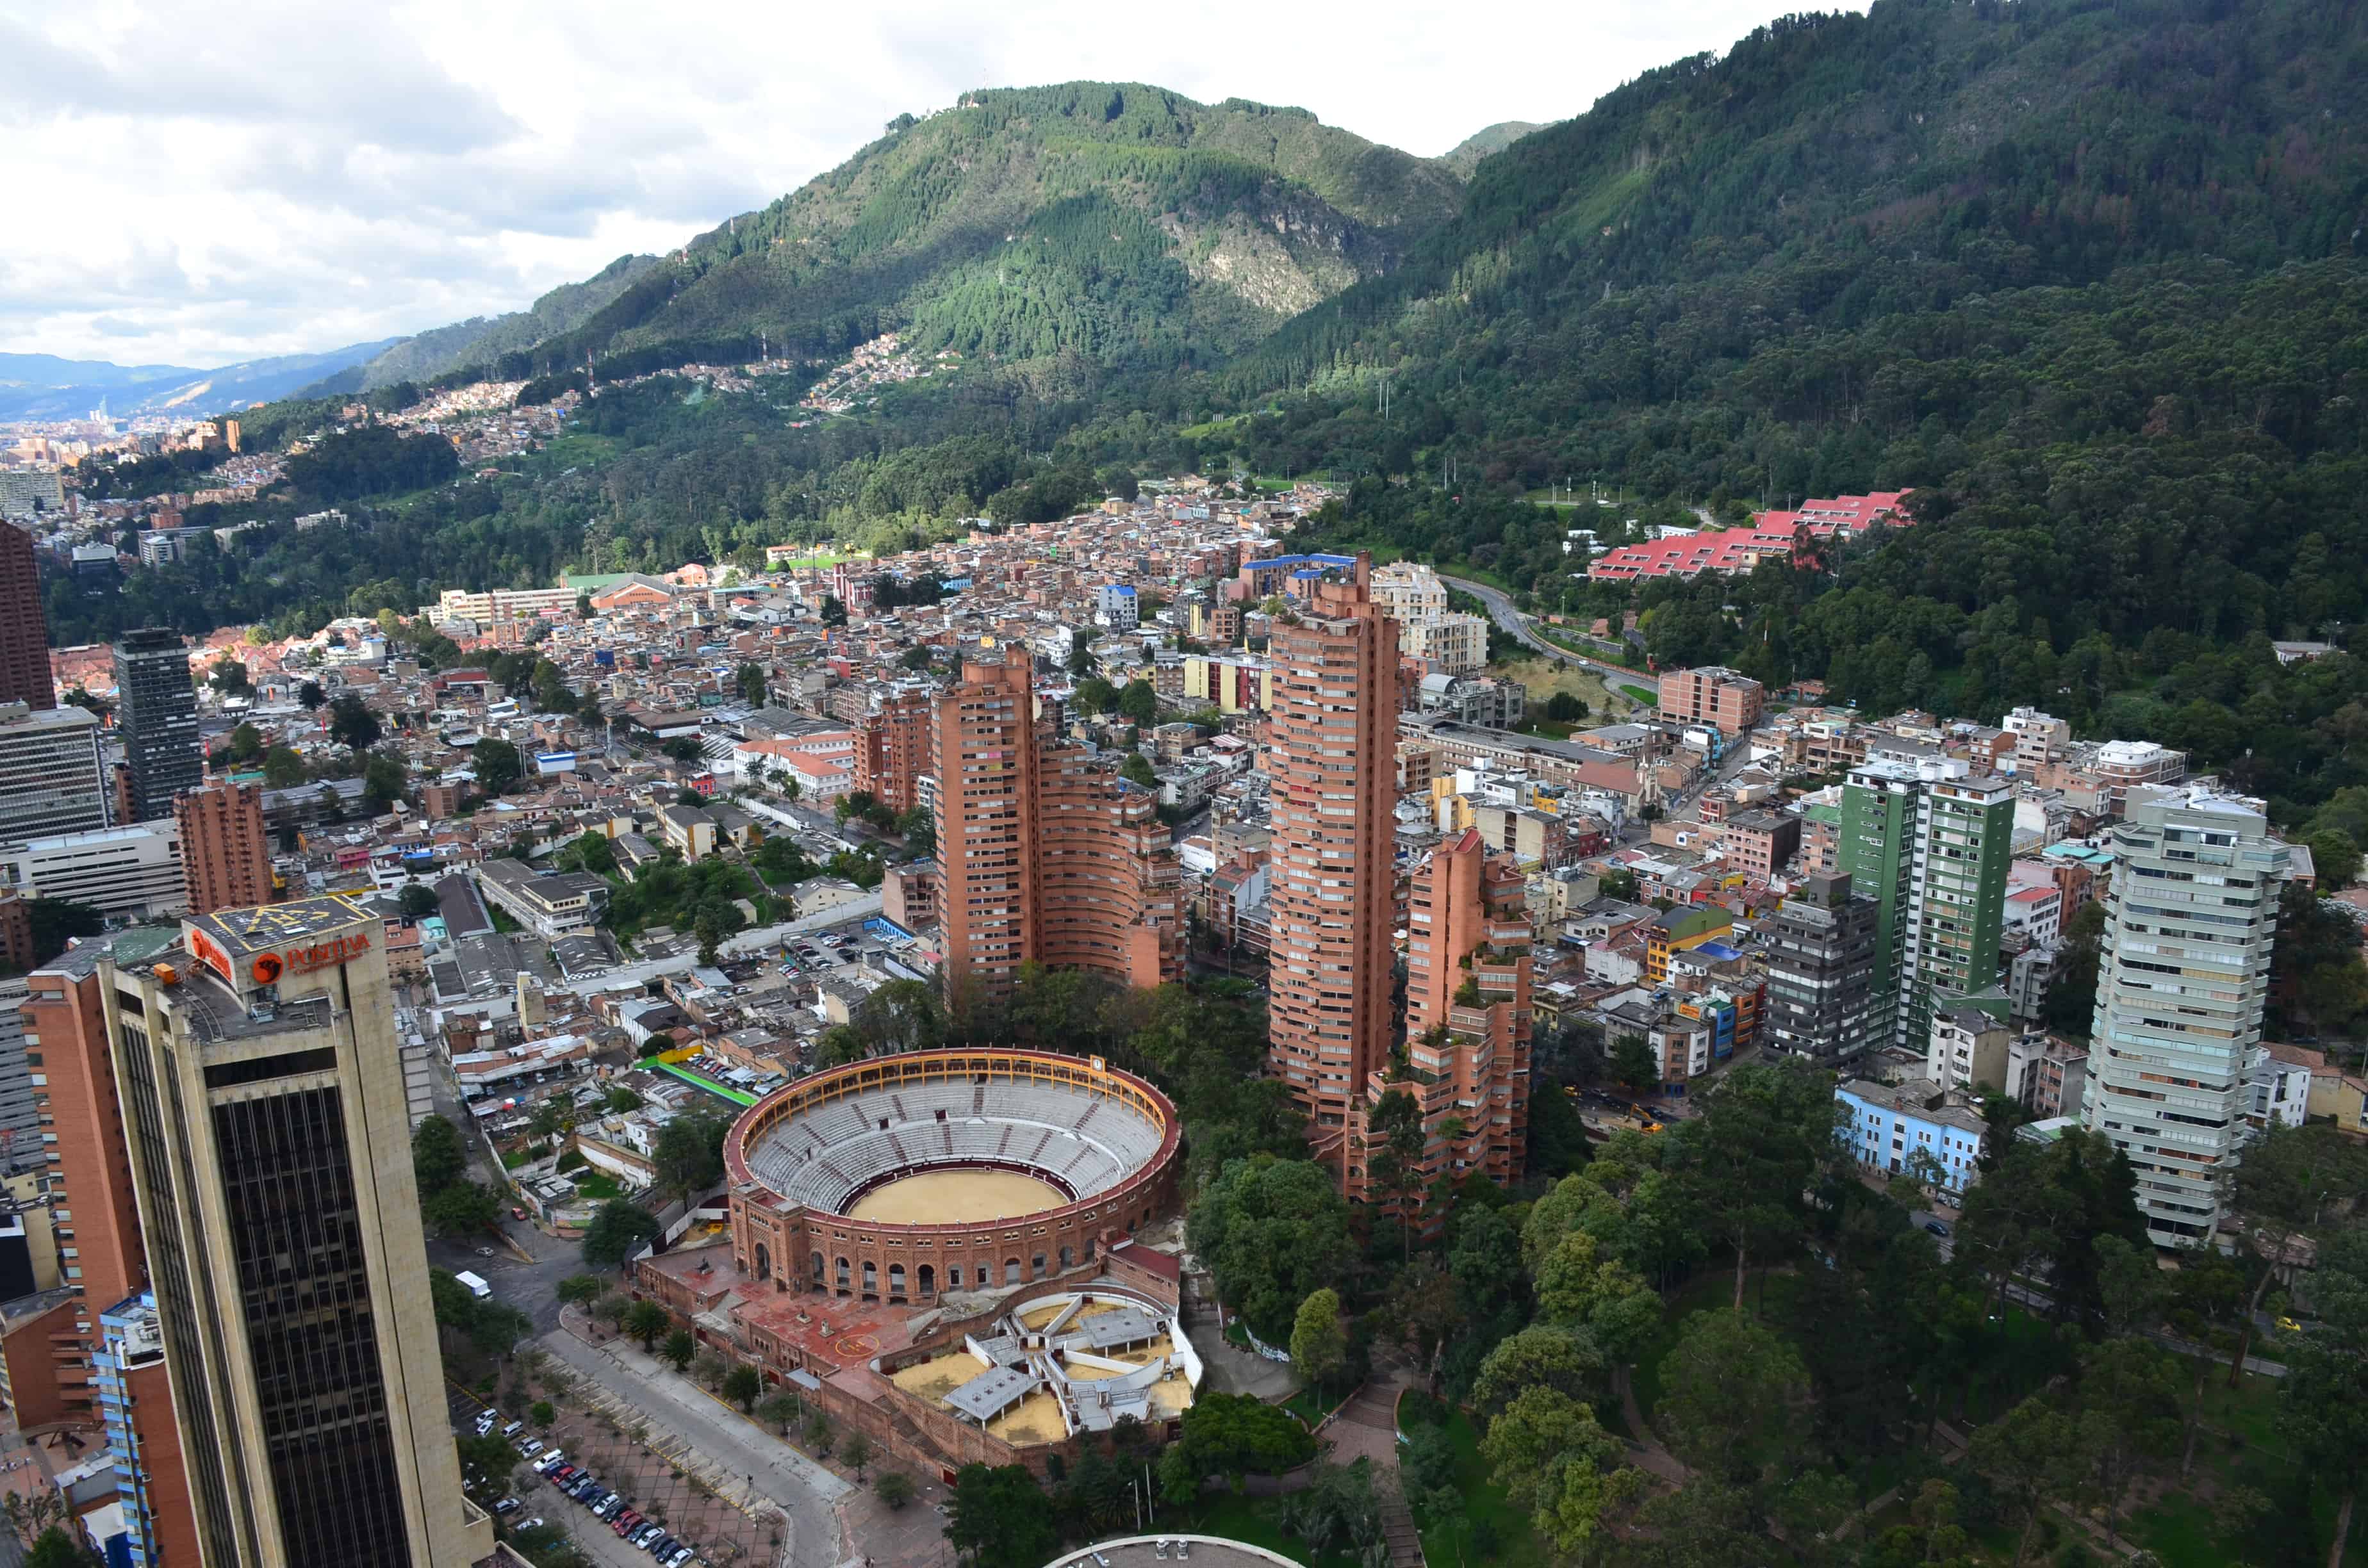 The view from Torre Colpatria in Bogotá, Colombia